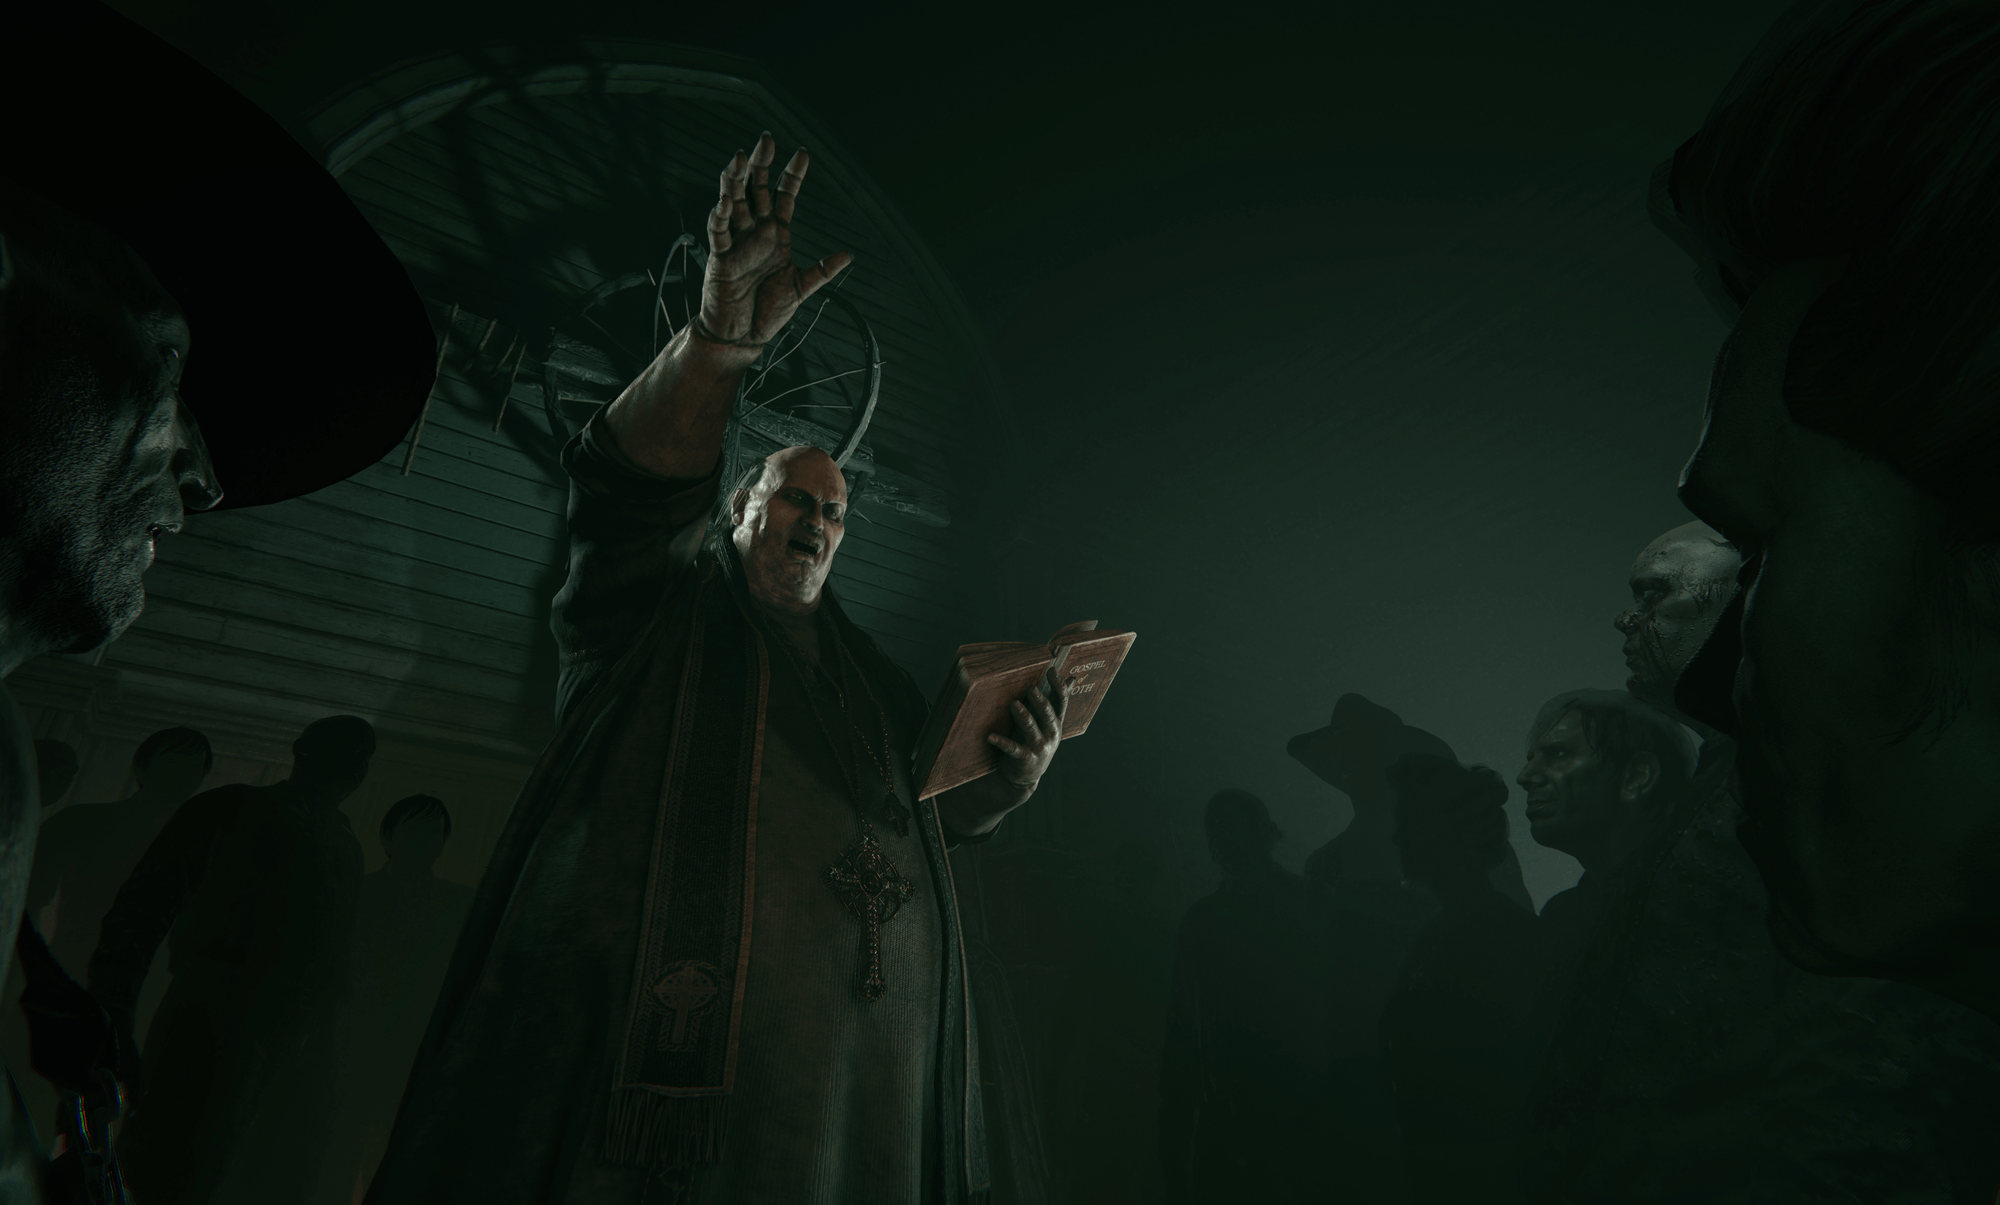 outlast 2 png